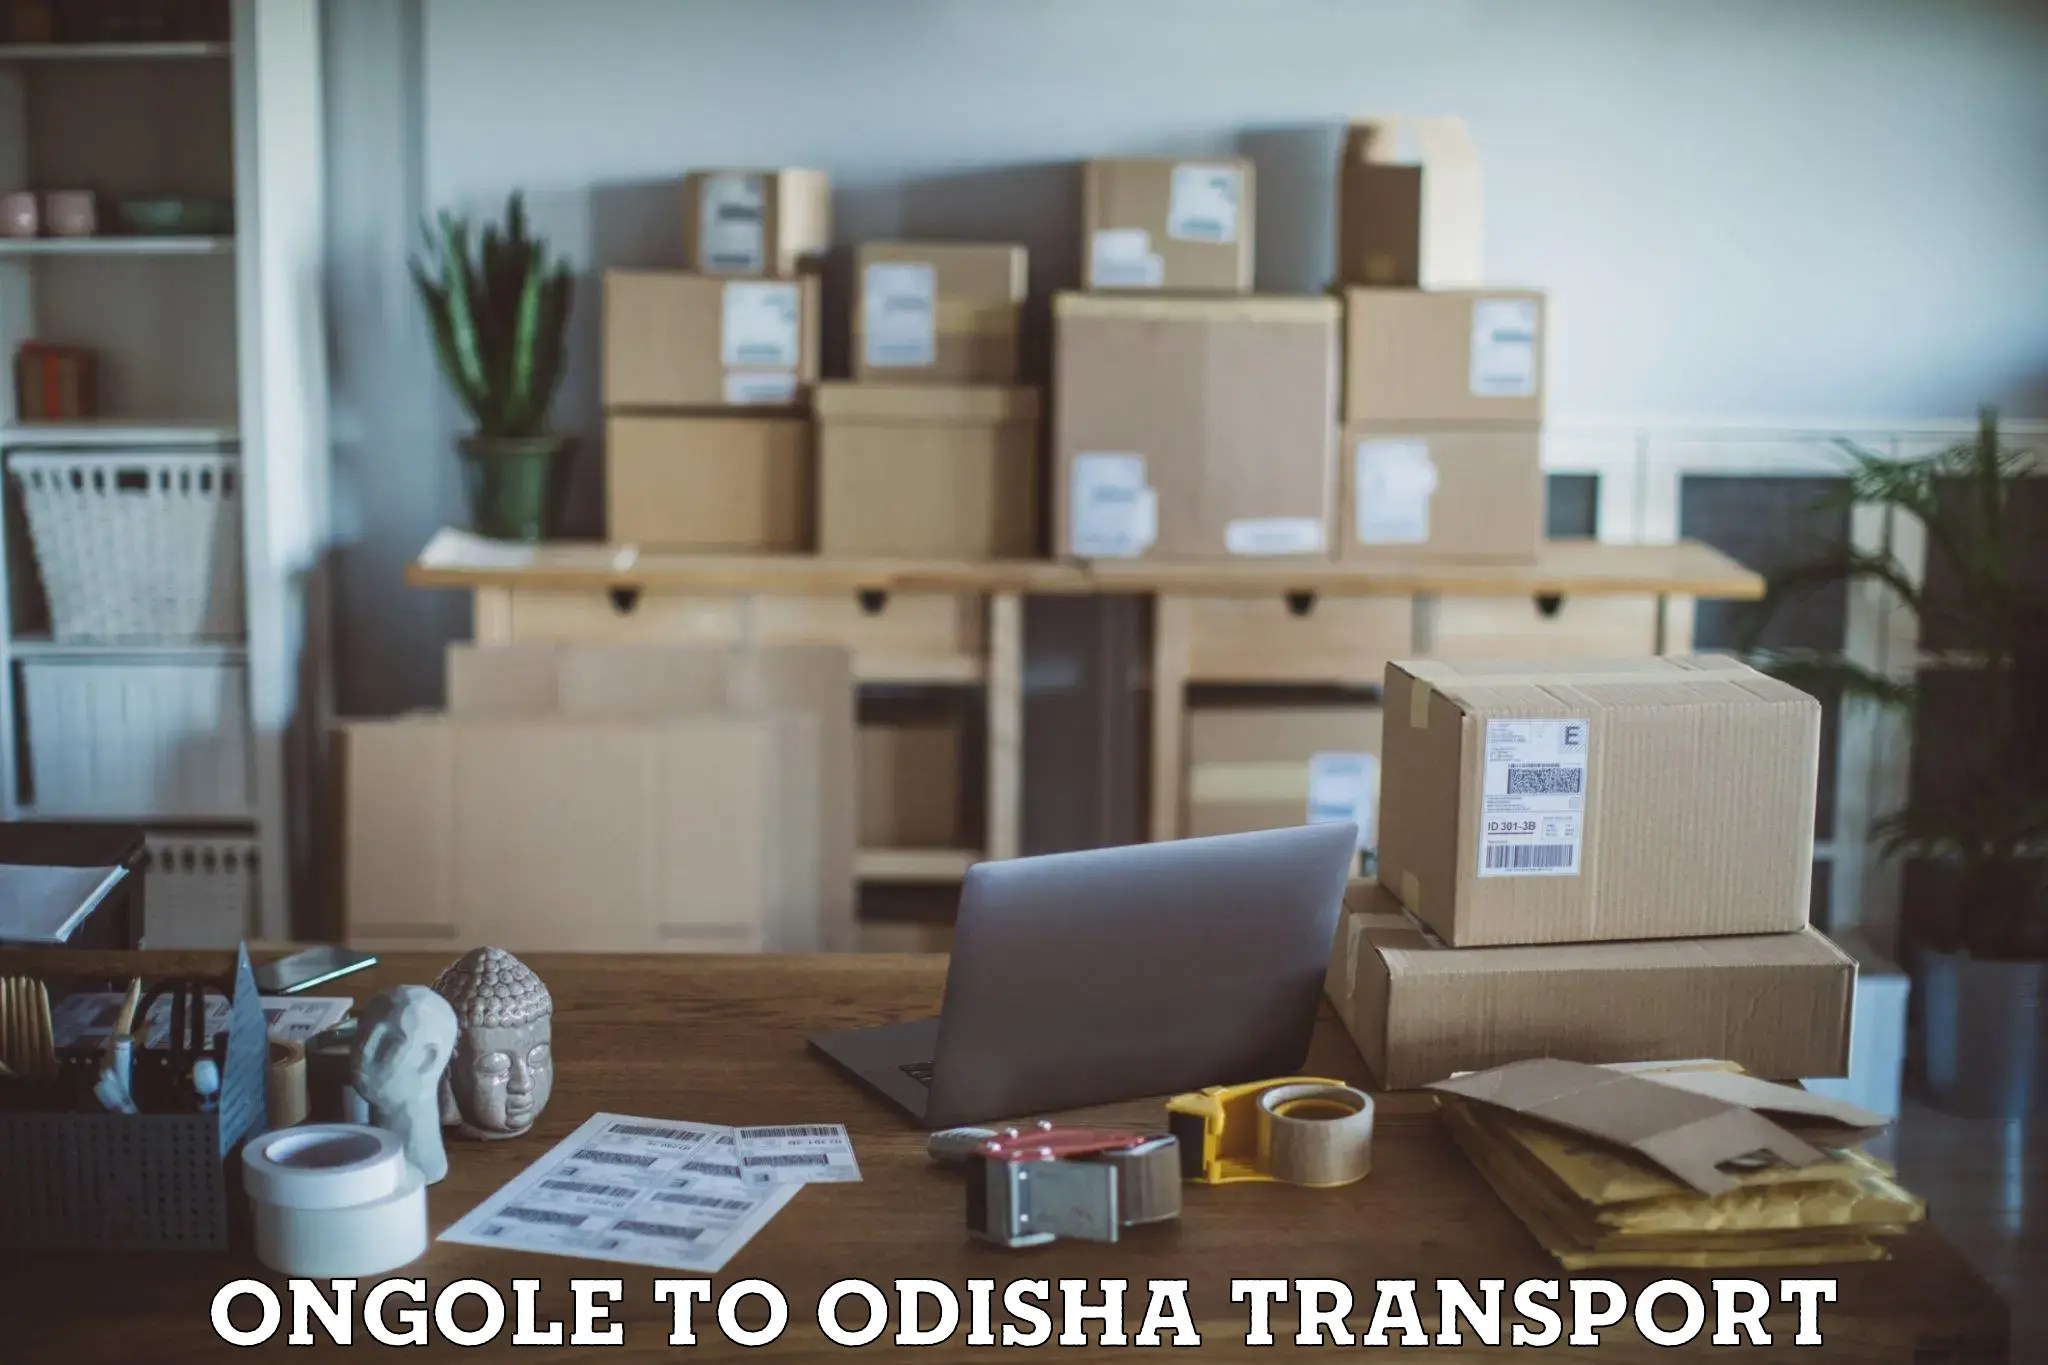 Daily parcel service transport Ongole to Odisha